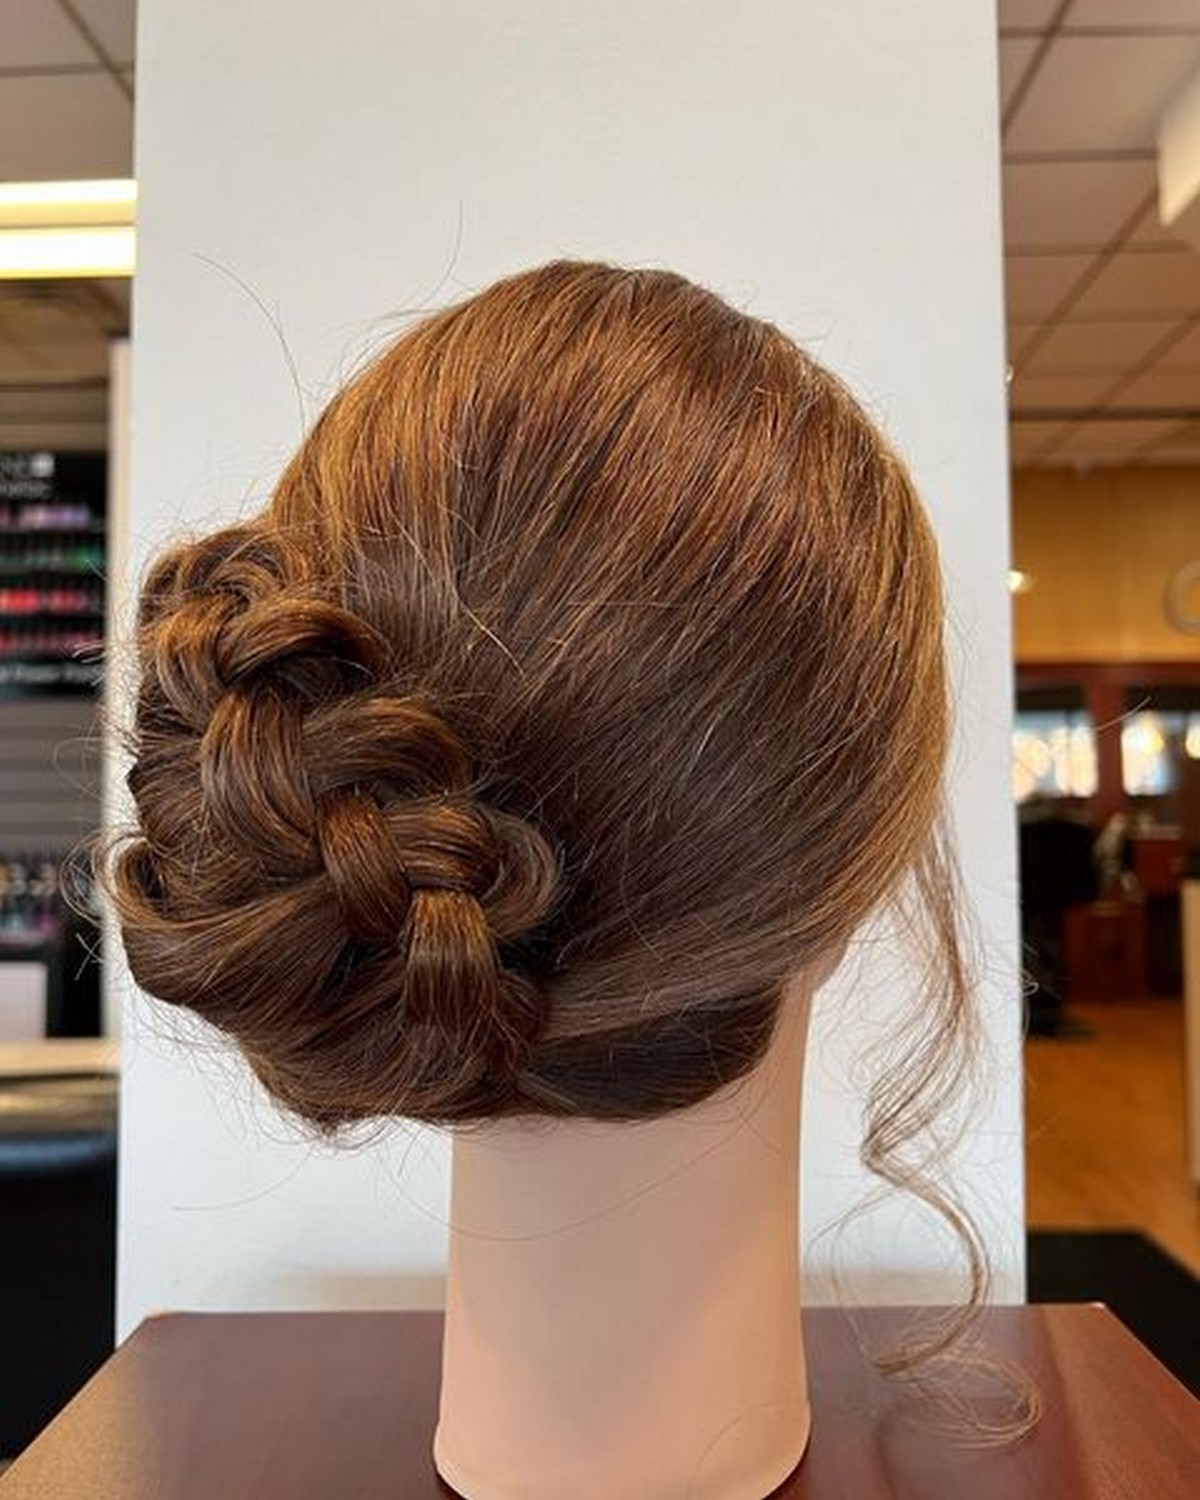 Braid Low Updo On The Side